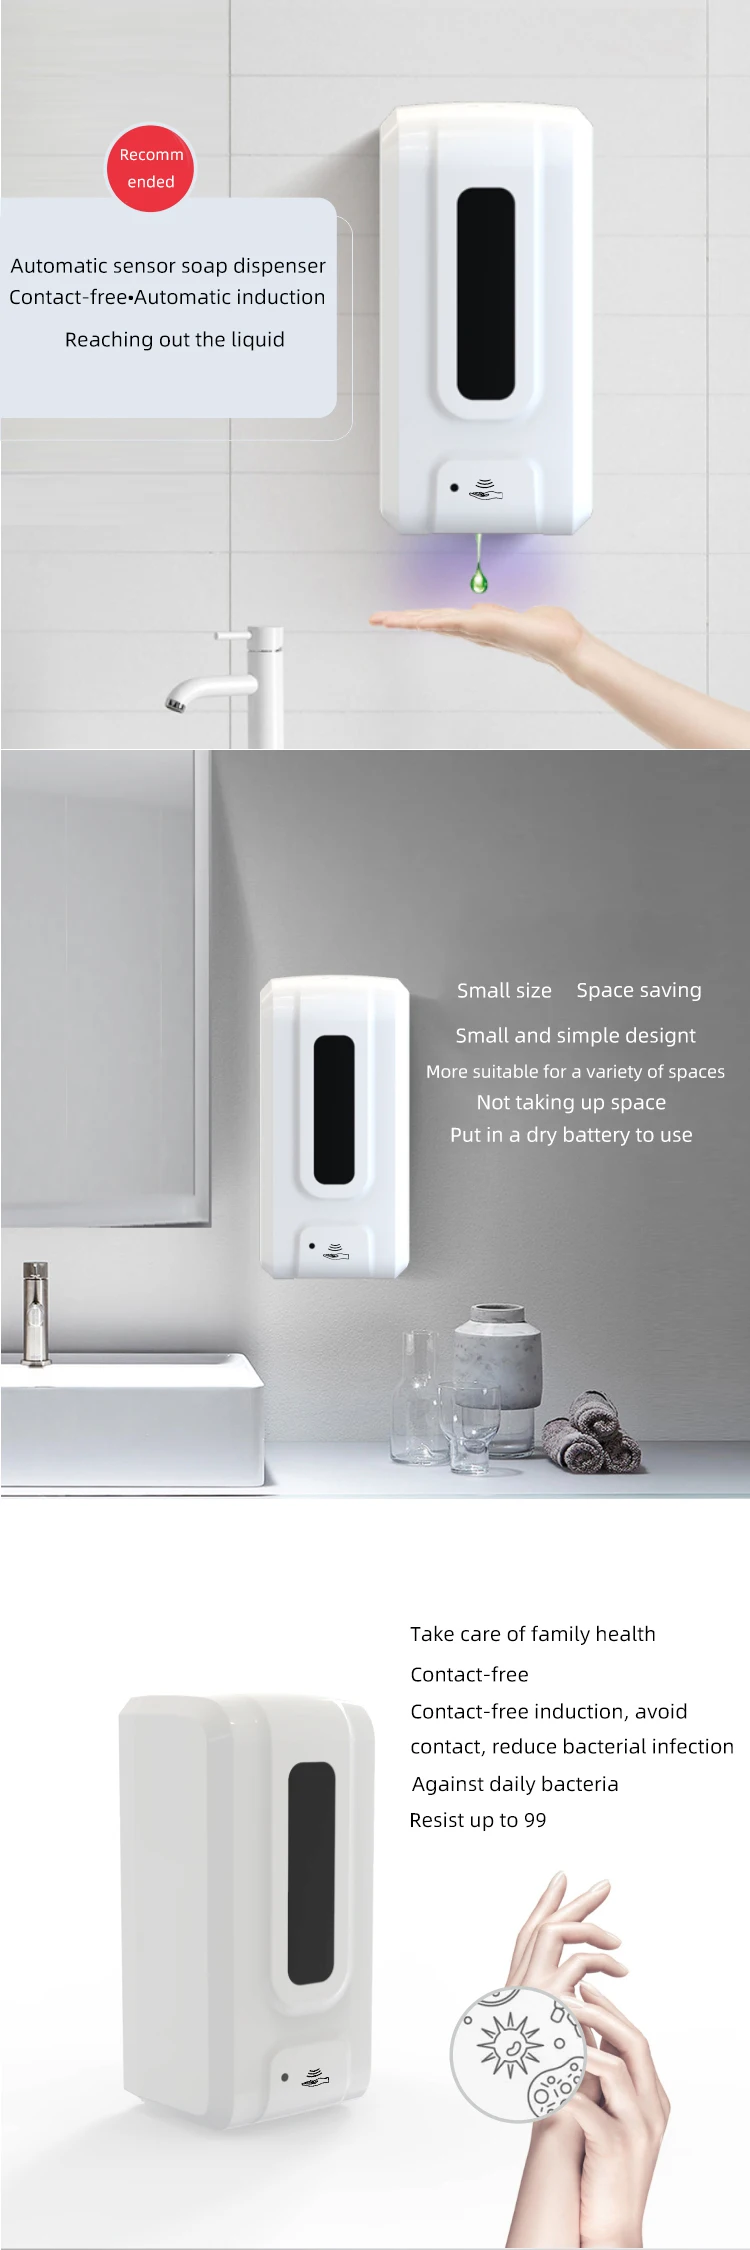 Popular commercial wall-mounted automatic alcohol spray soap dispenser